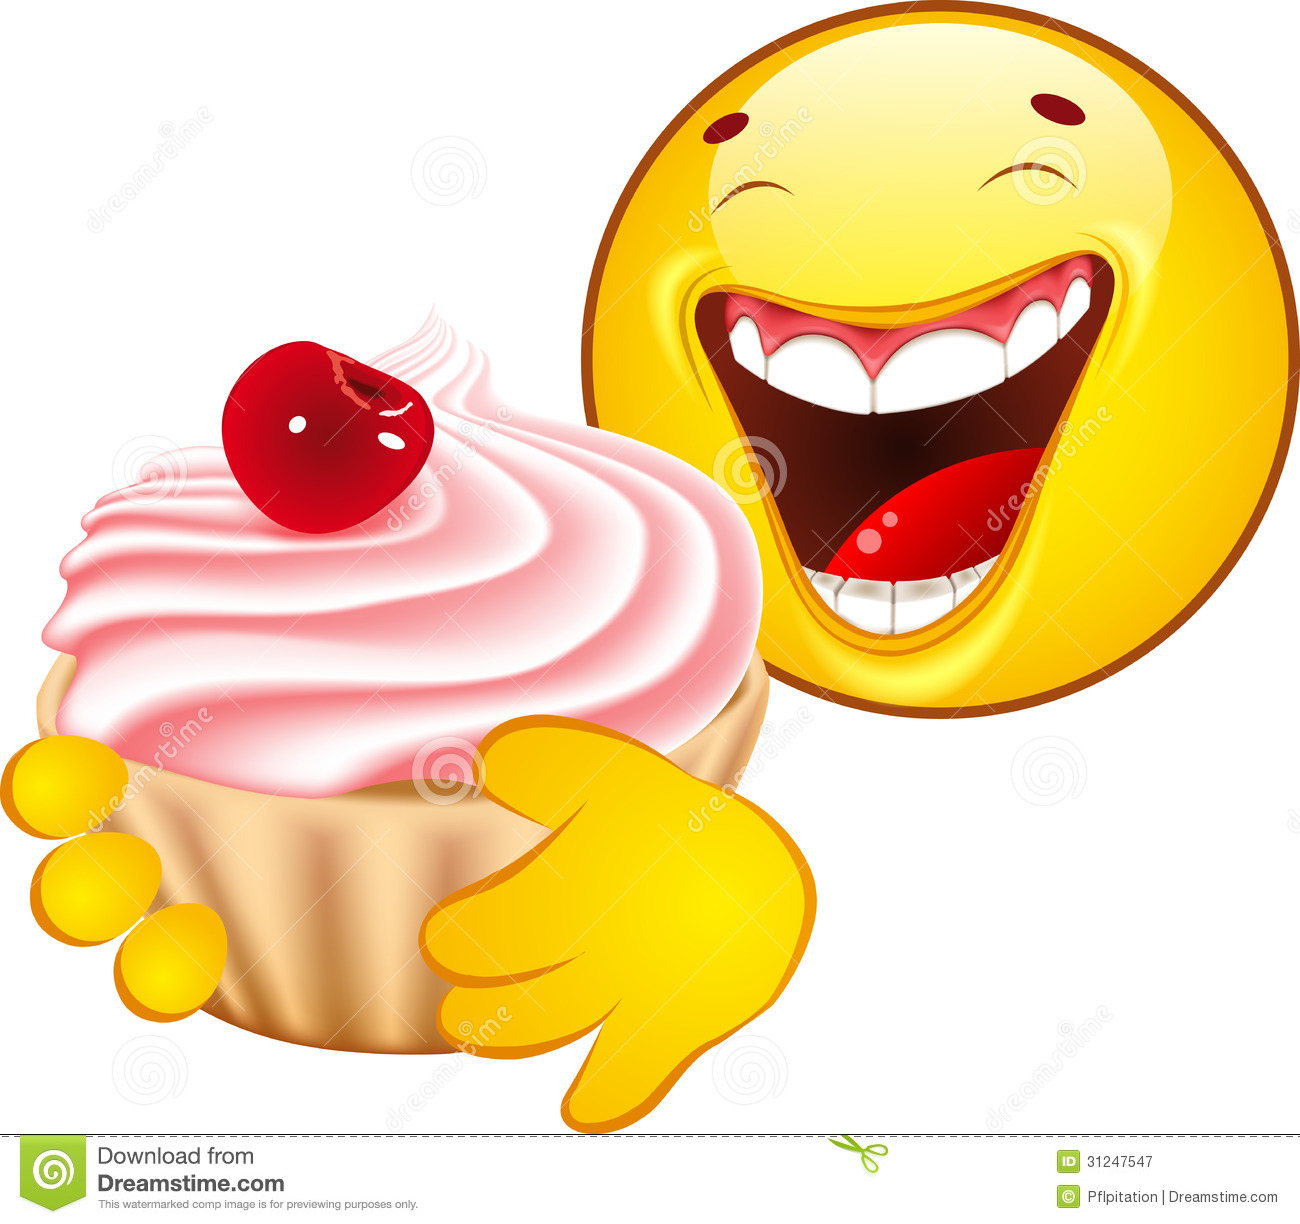 Emoticon Eating A Dessert Royalty Free Stock Photography   Image